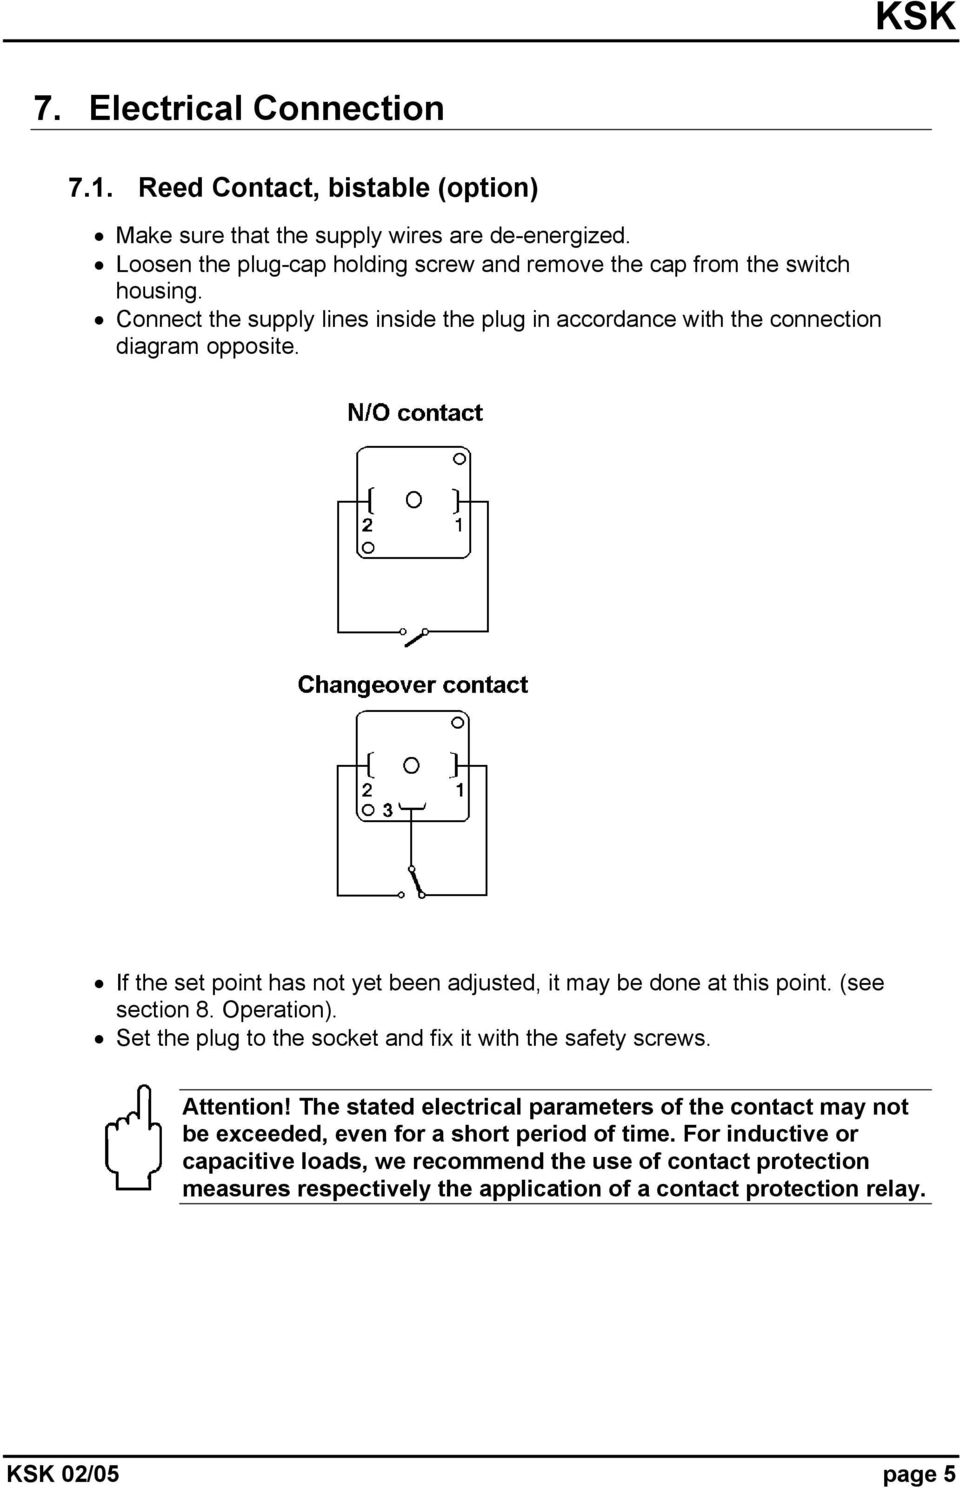 If the set point has not yet been adjusted, it may be done at this point. (see section 8. Operation). Set the plug to the socket and fix it with the safety screws. Attention!